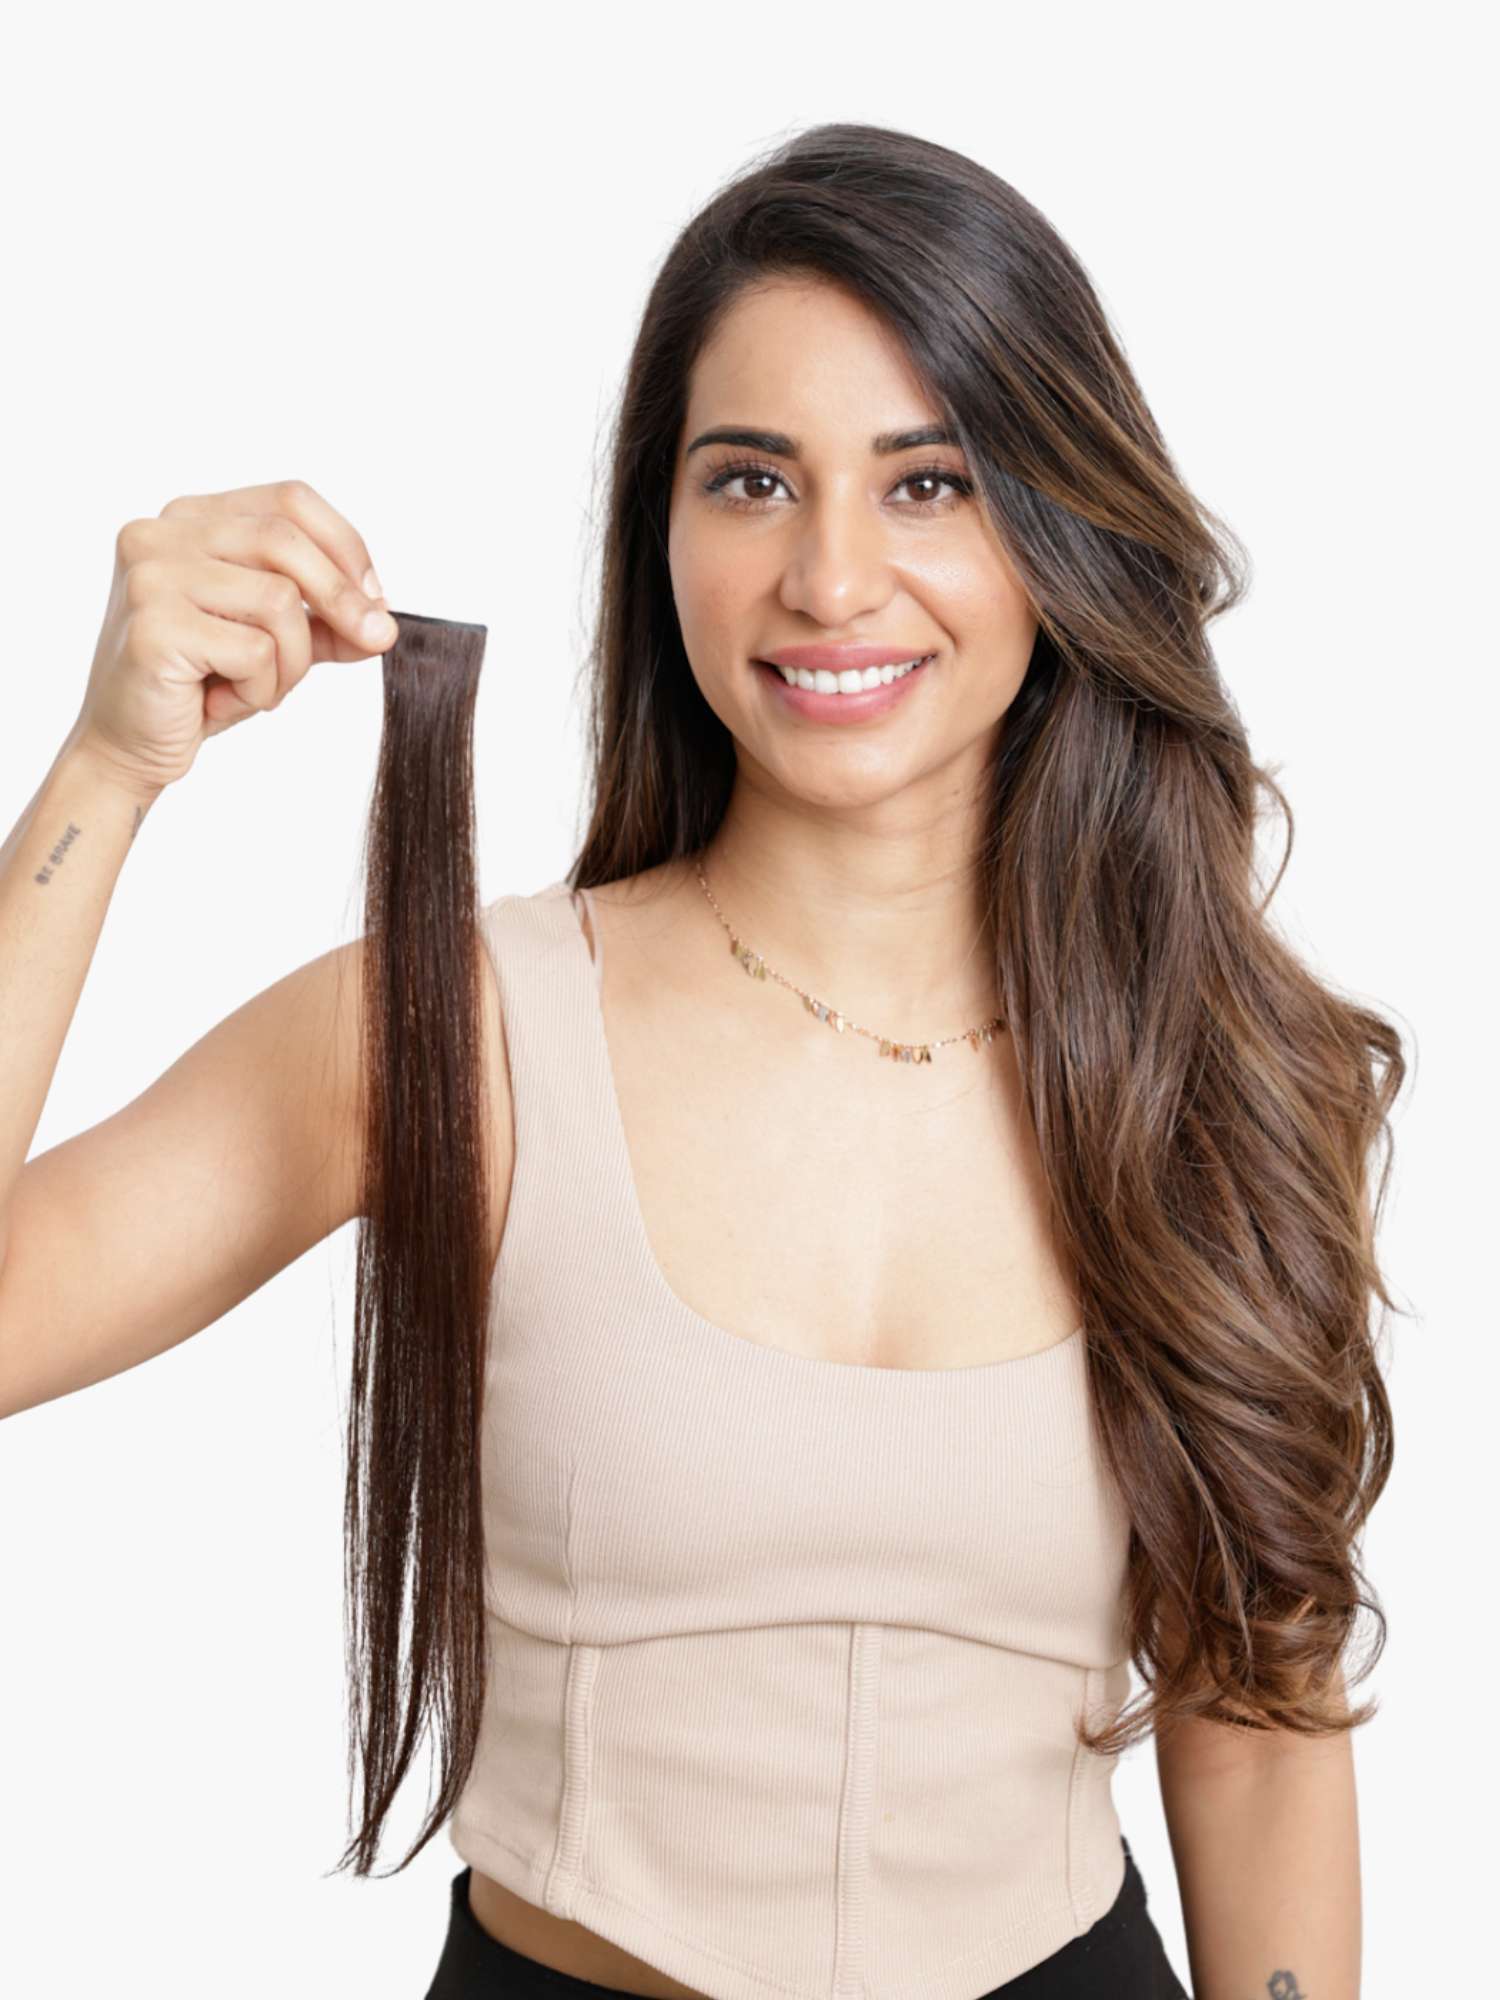 How to Use Clip in Colored Hair Streaks to Fake Highlights